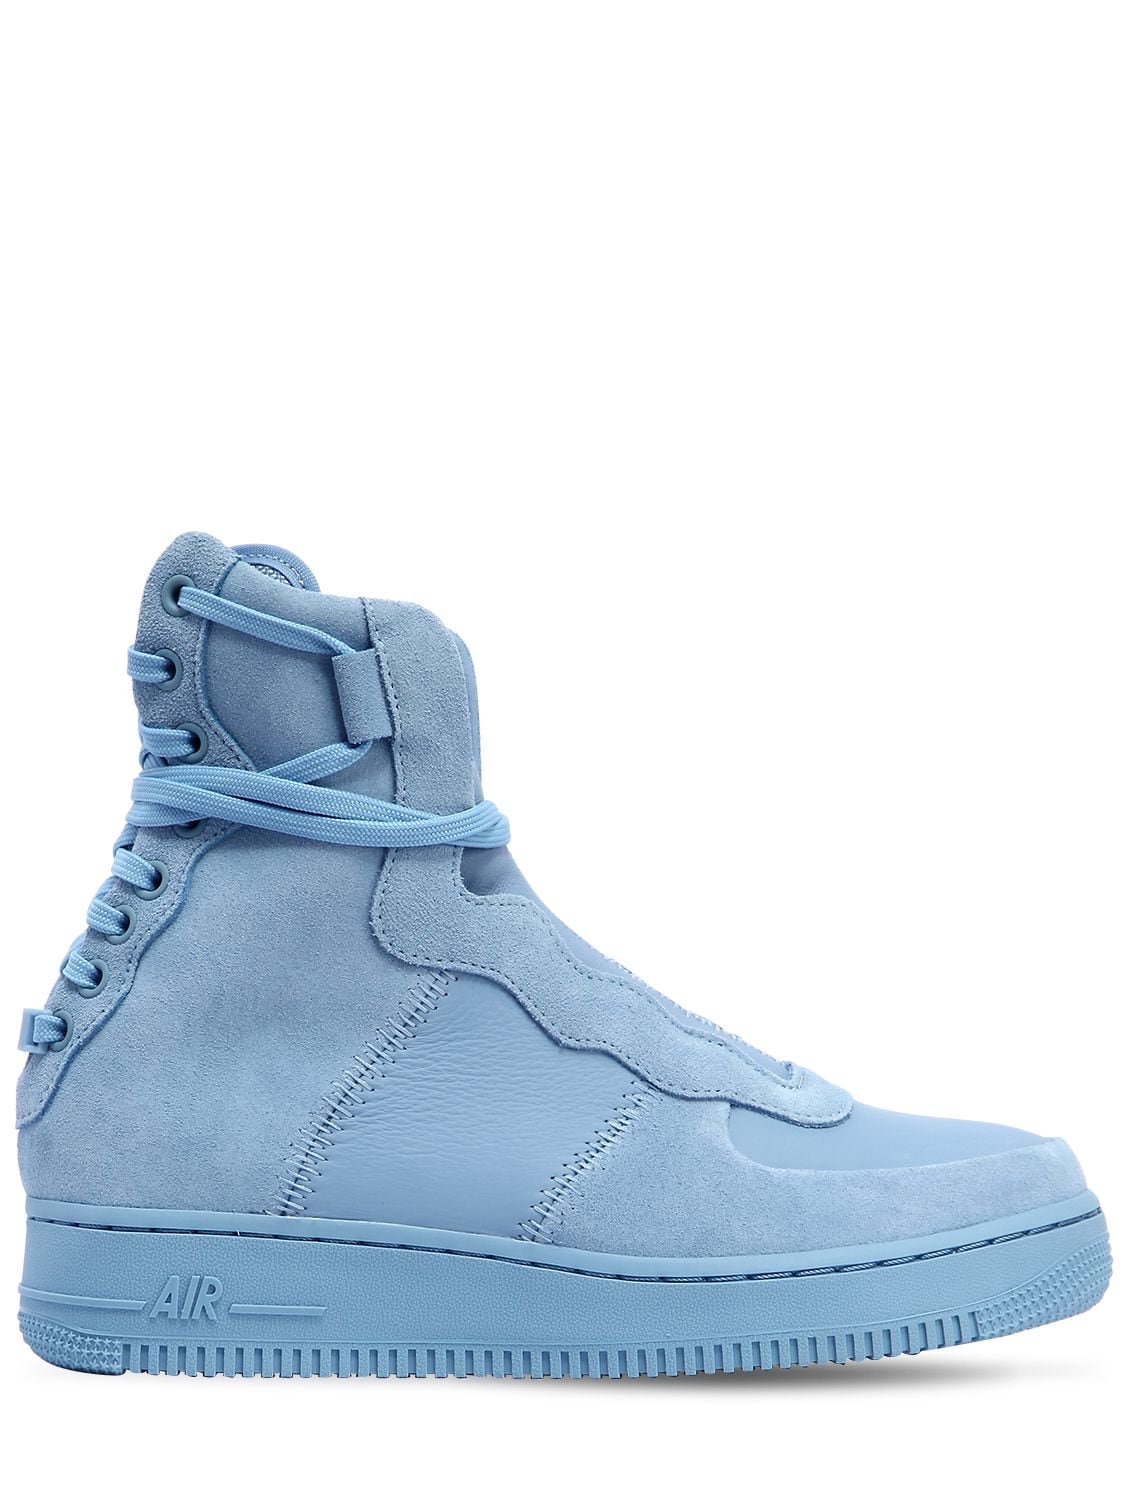 nike air force 1 light blue suede